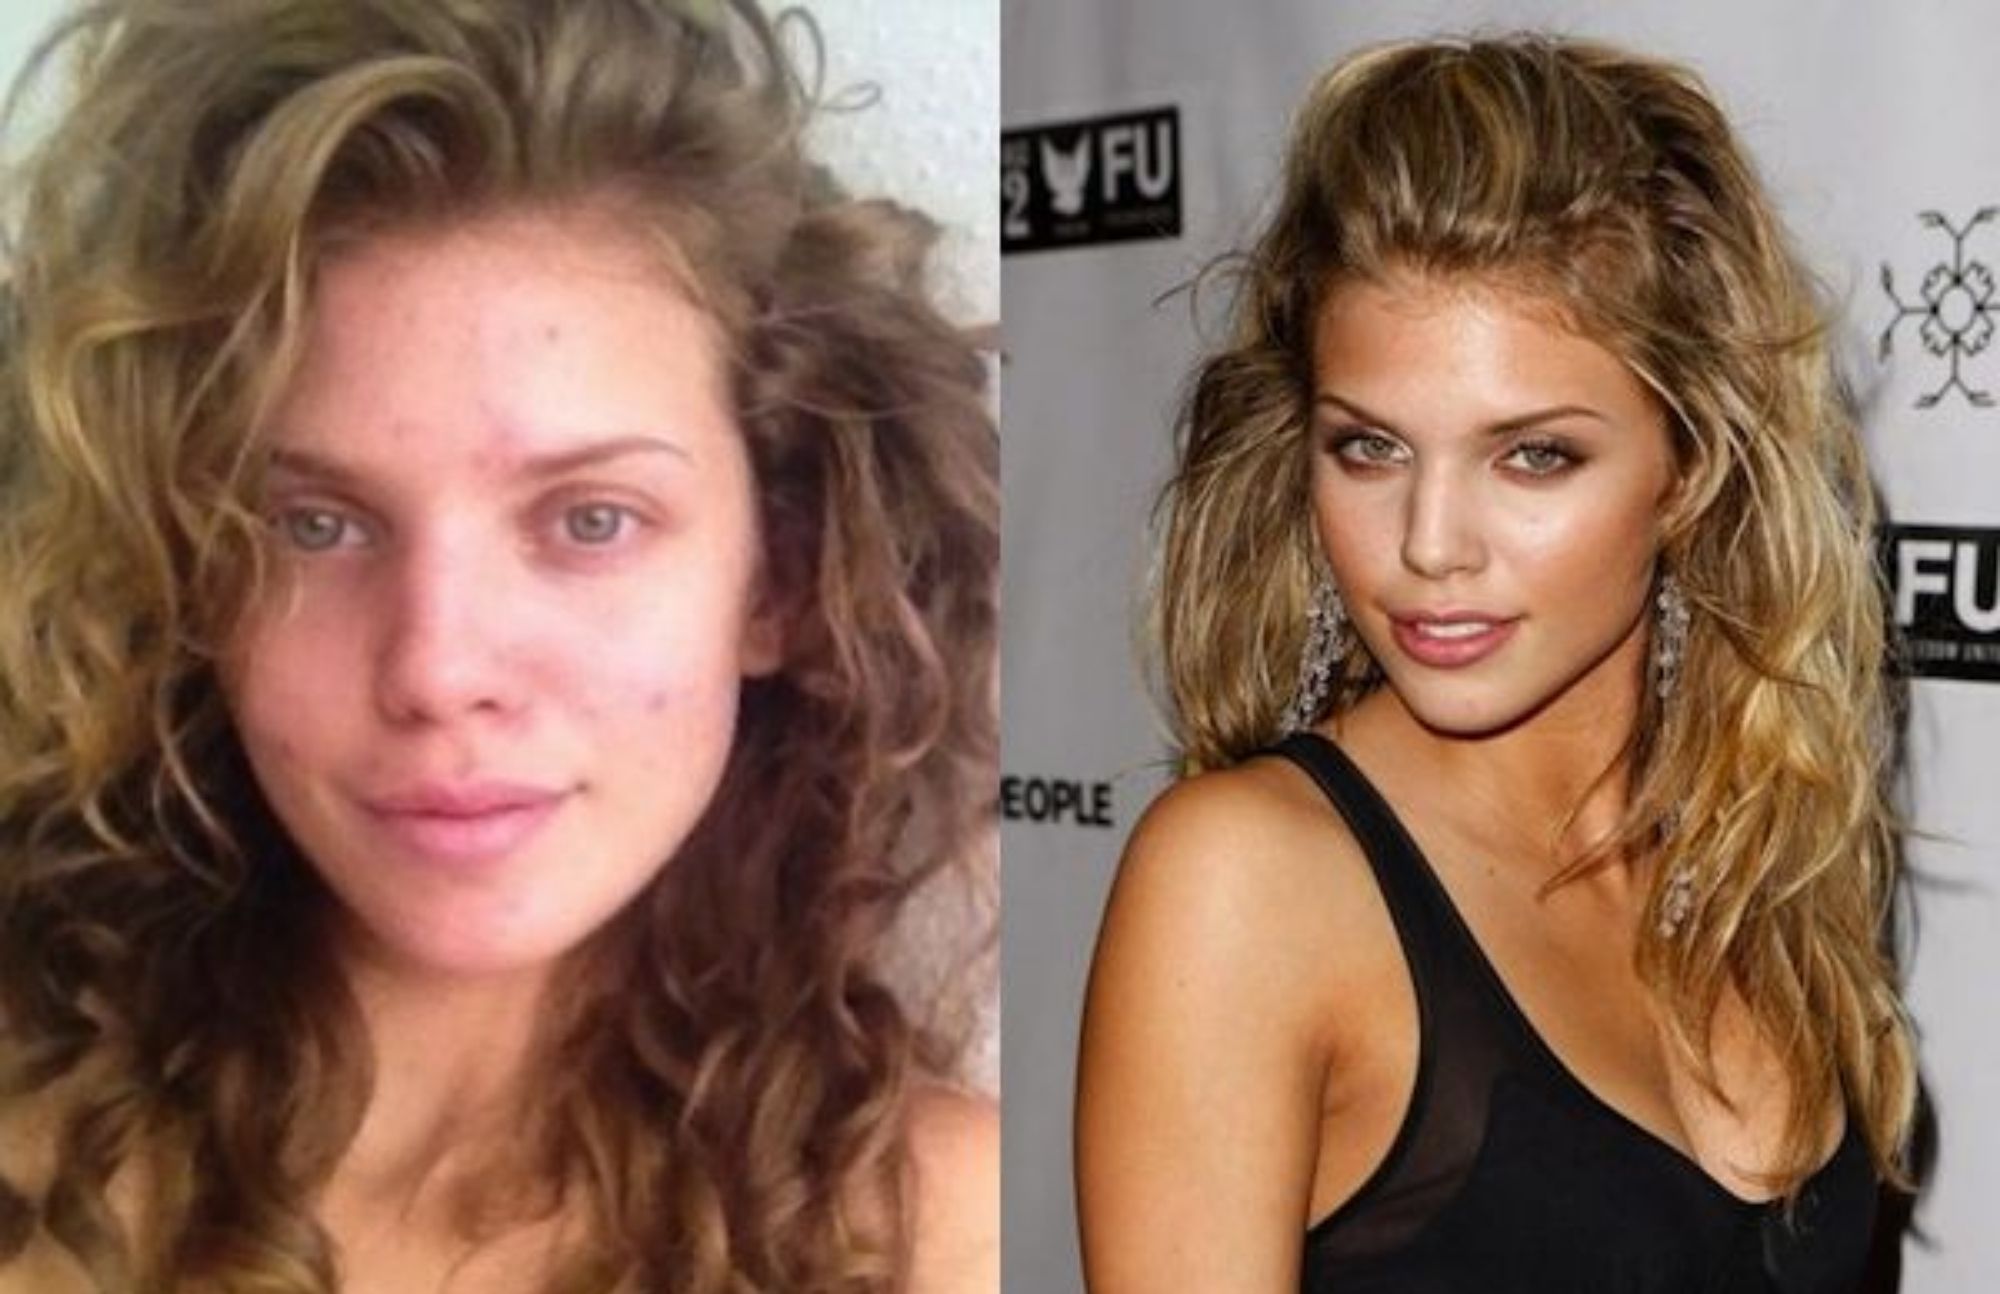 AnnaLynne McCord is shown without makeup on the left, with strands of gold wavy hair, and with makeup on the right